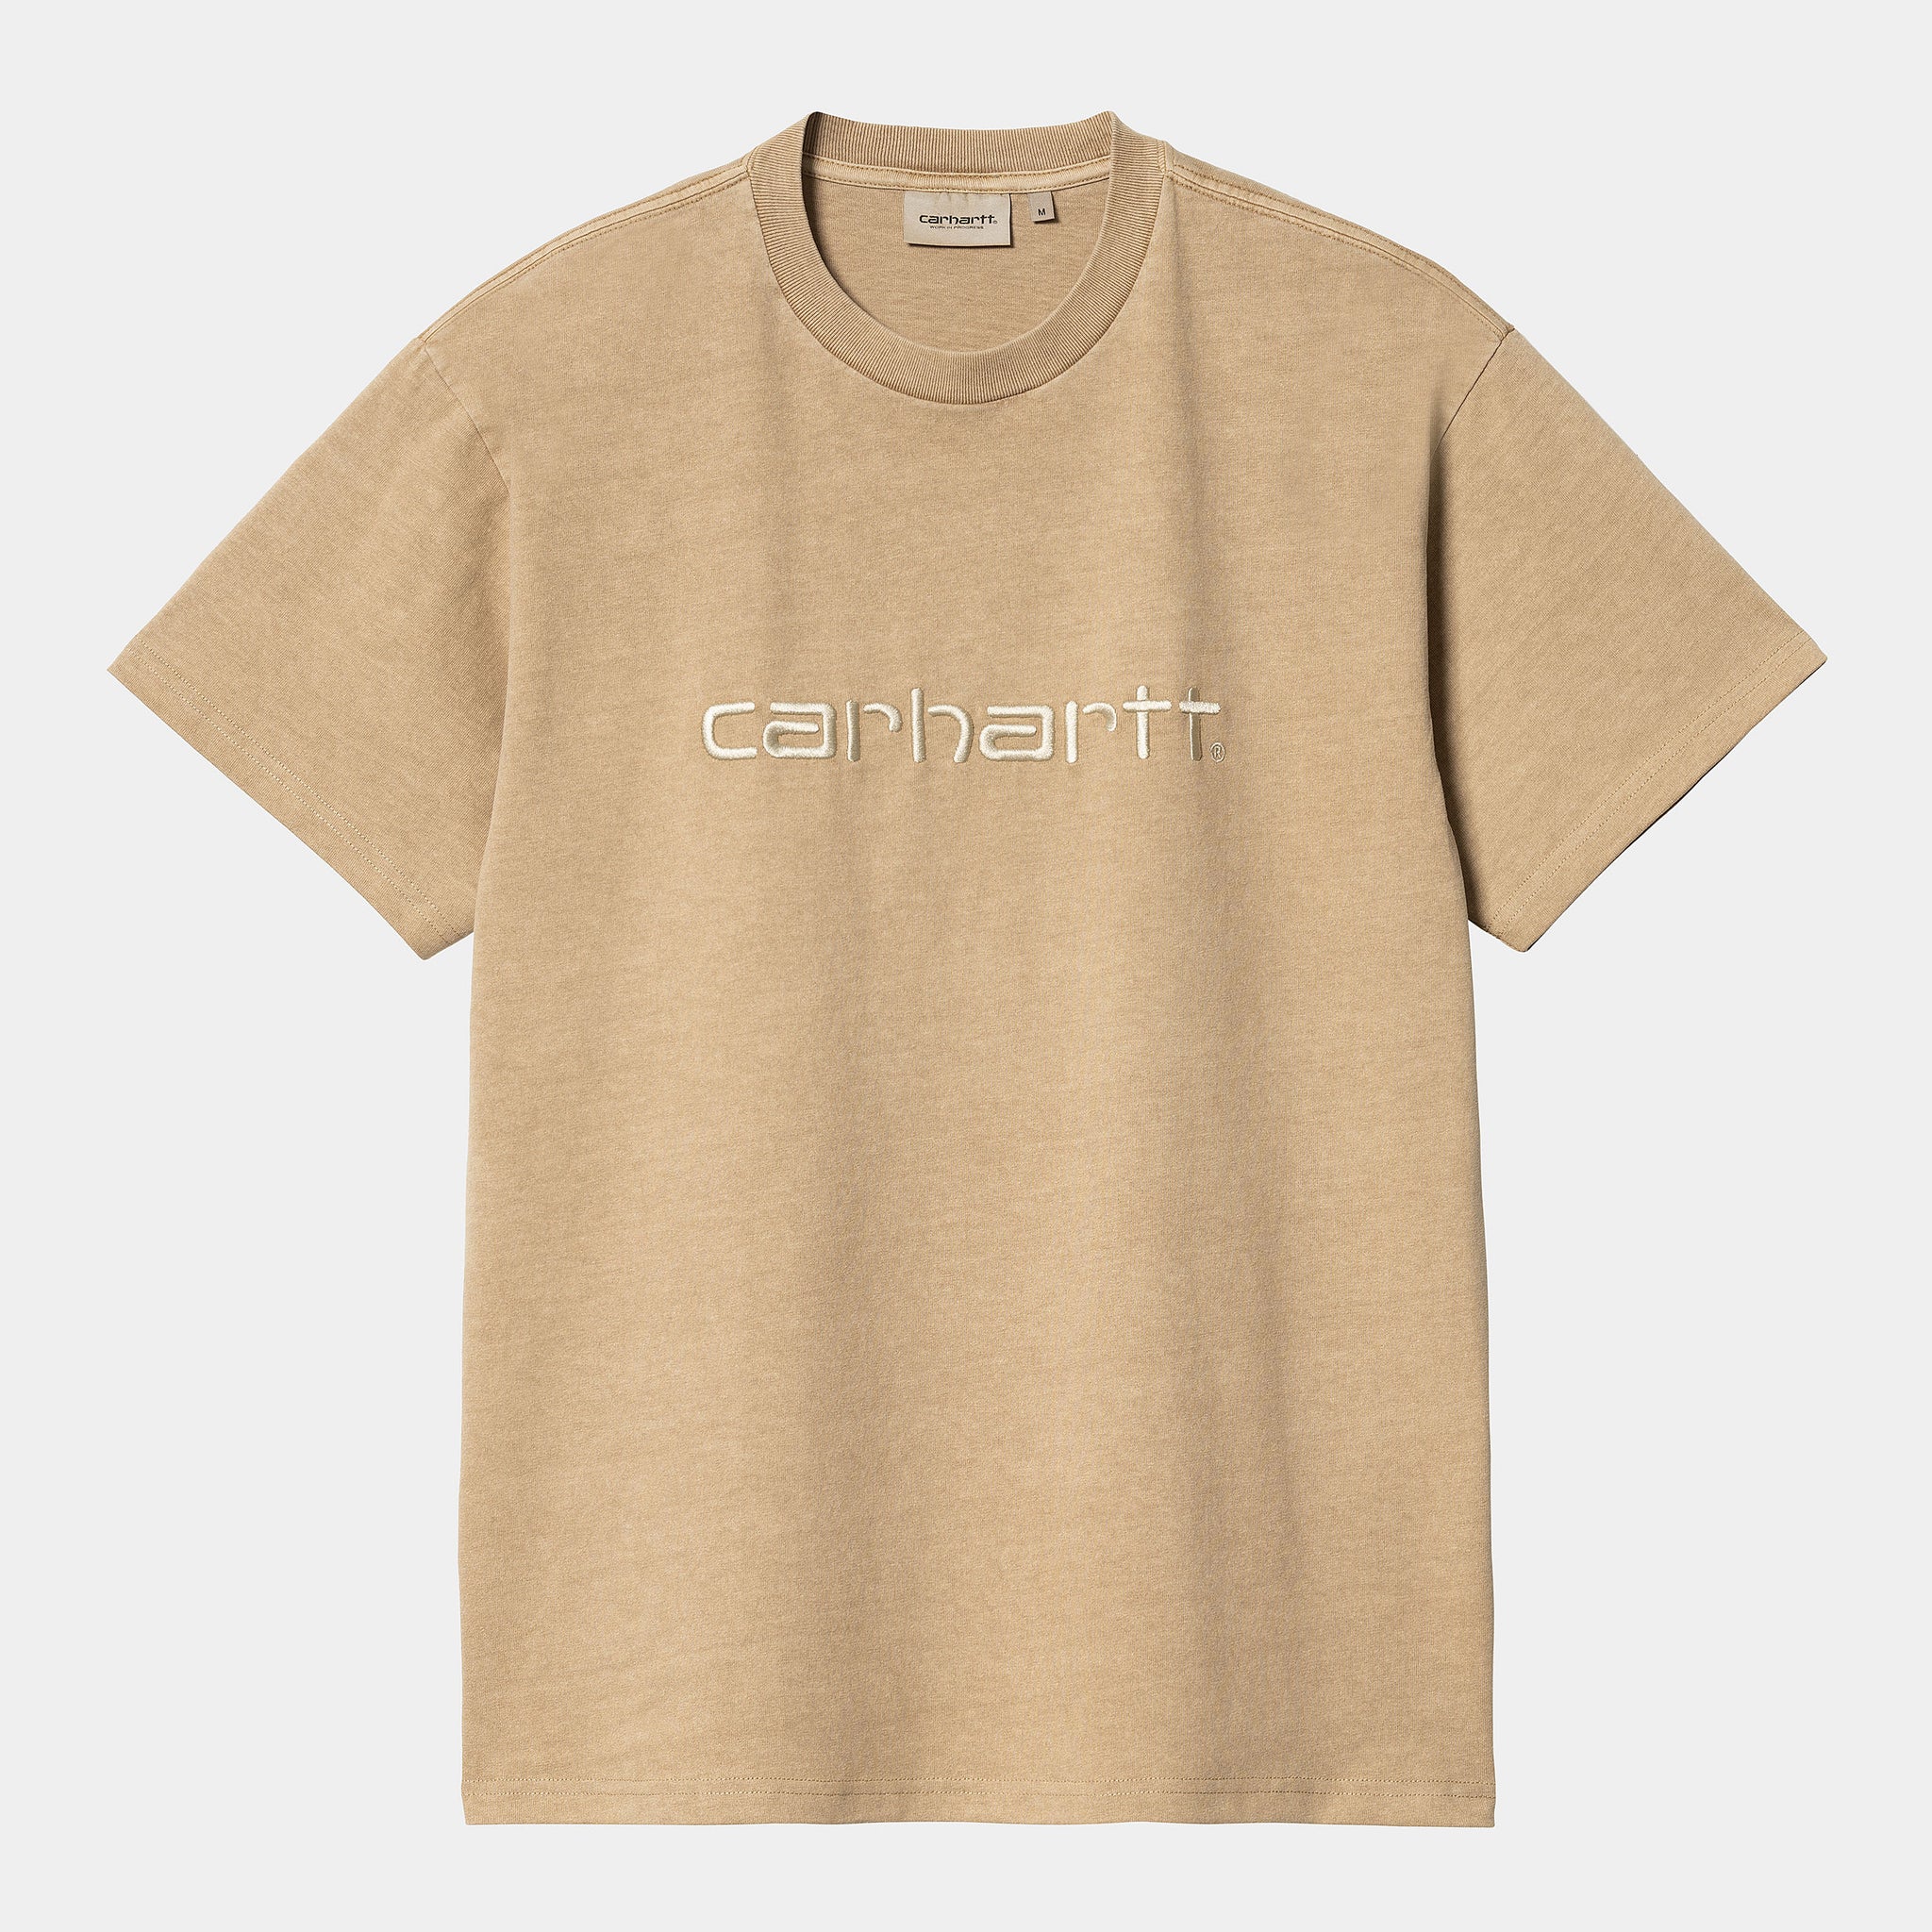 Carhartt WIP S/S Duster T-shirt (Dusty H Brown garment dyed)